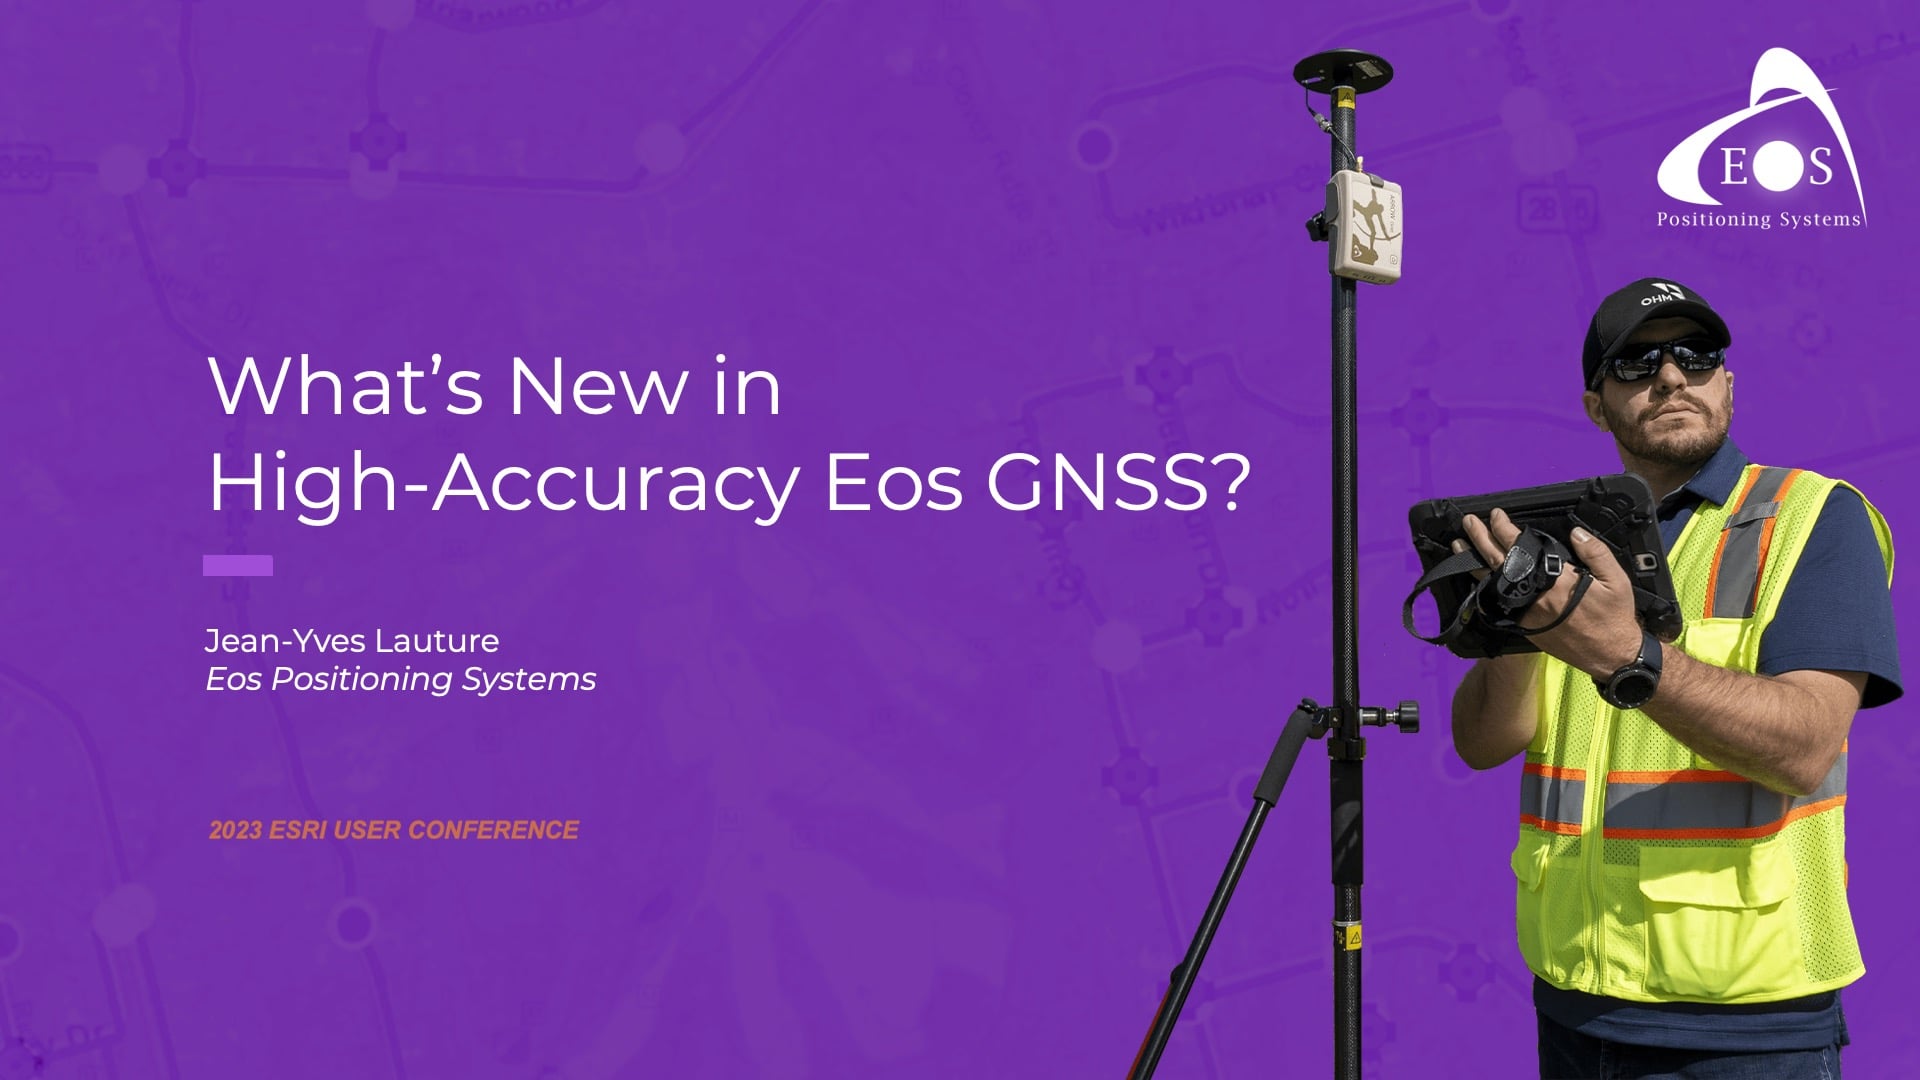 What's new in high-accuracy Eos GNSS